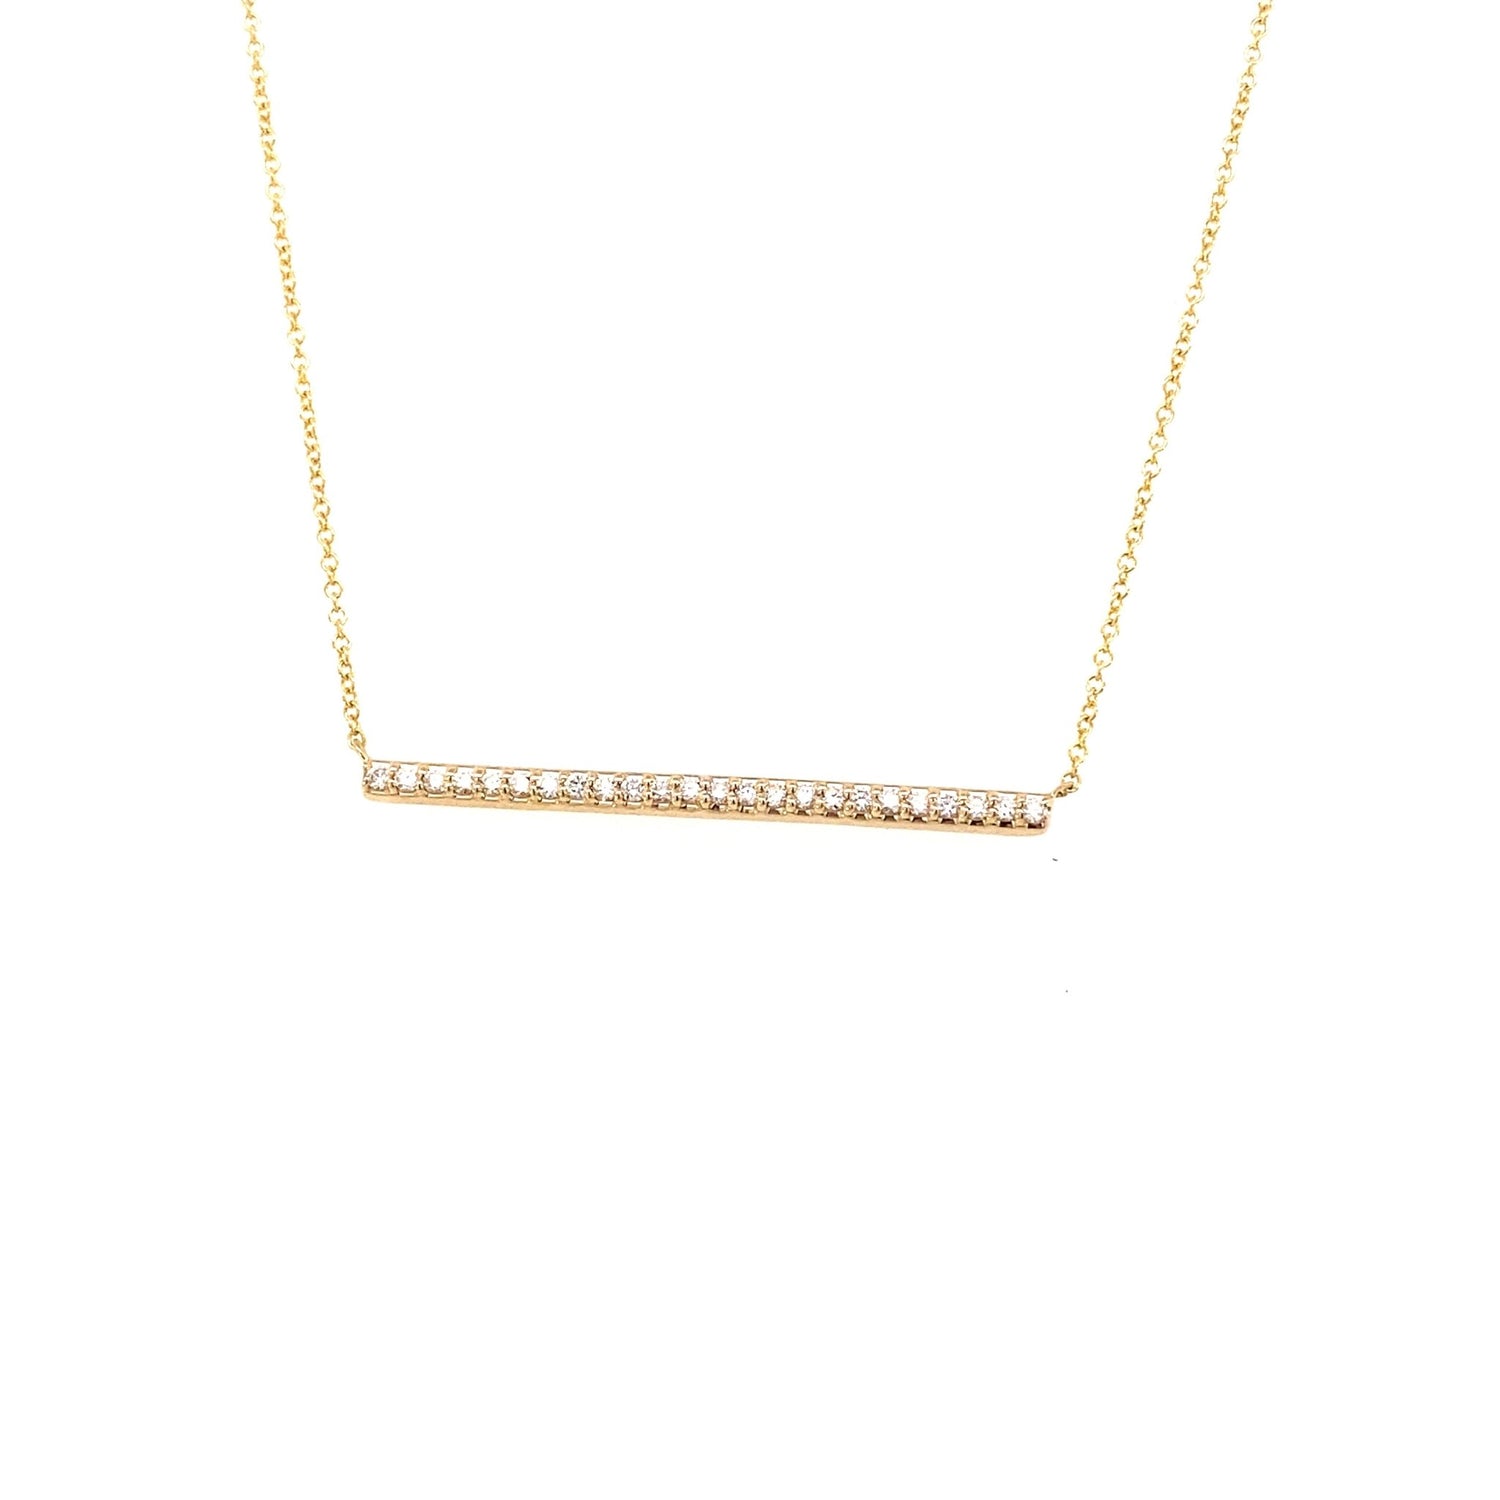 Necklace diamond trapeze bar 24=.24ct 14kt yellow gold - Gaines Jewelers